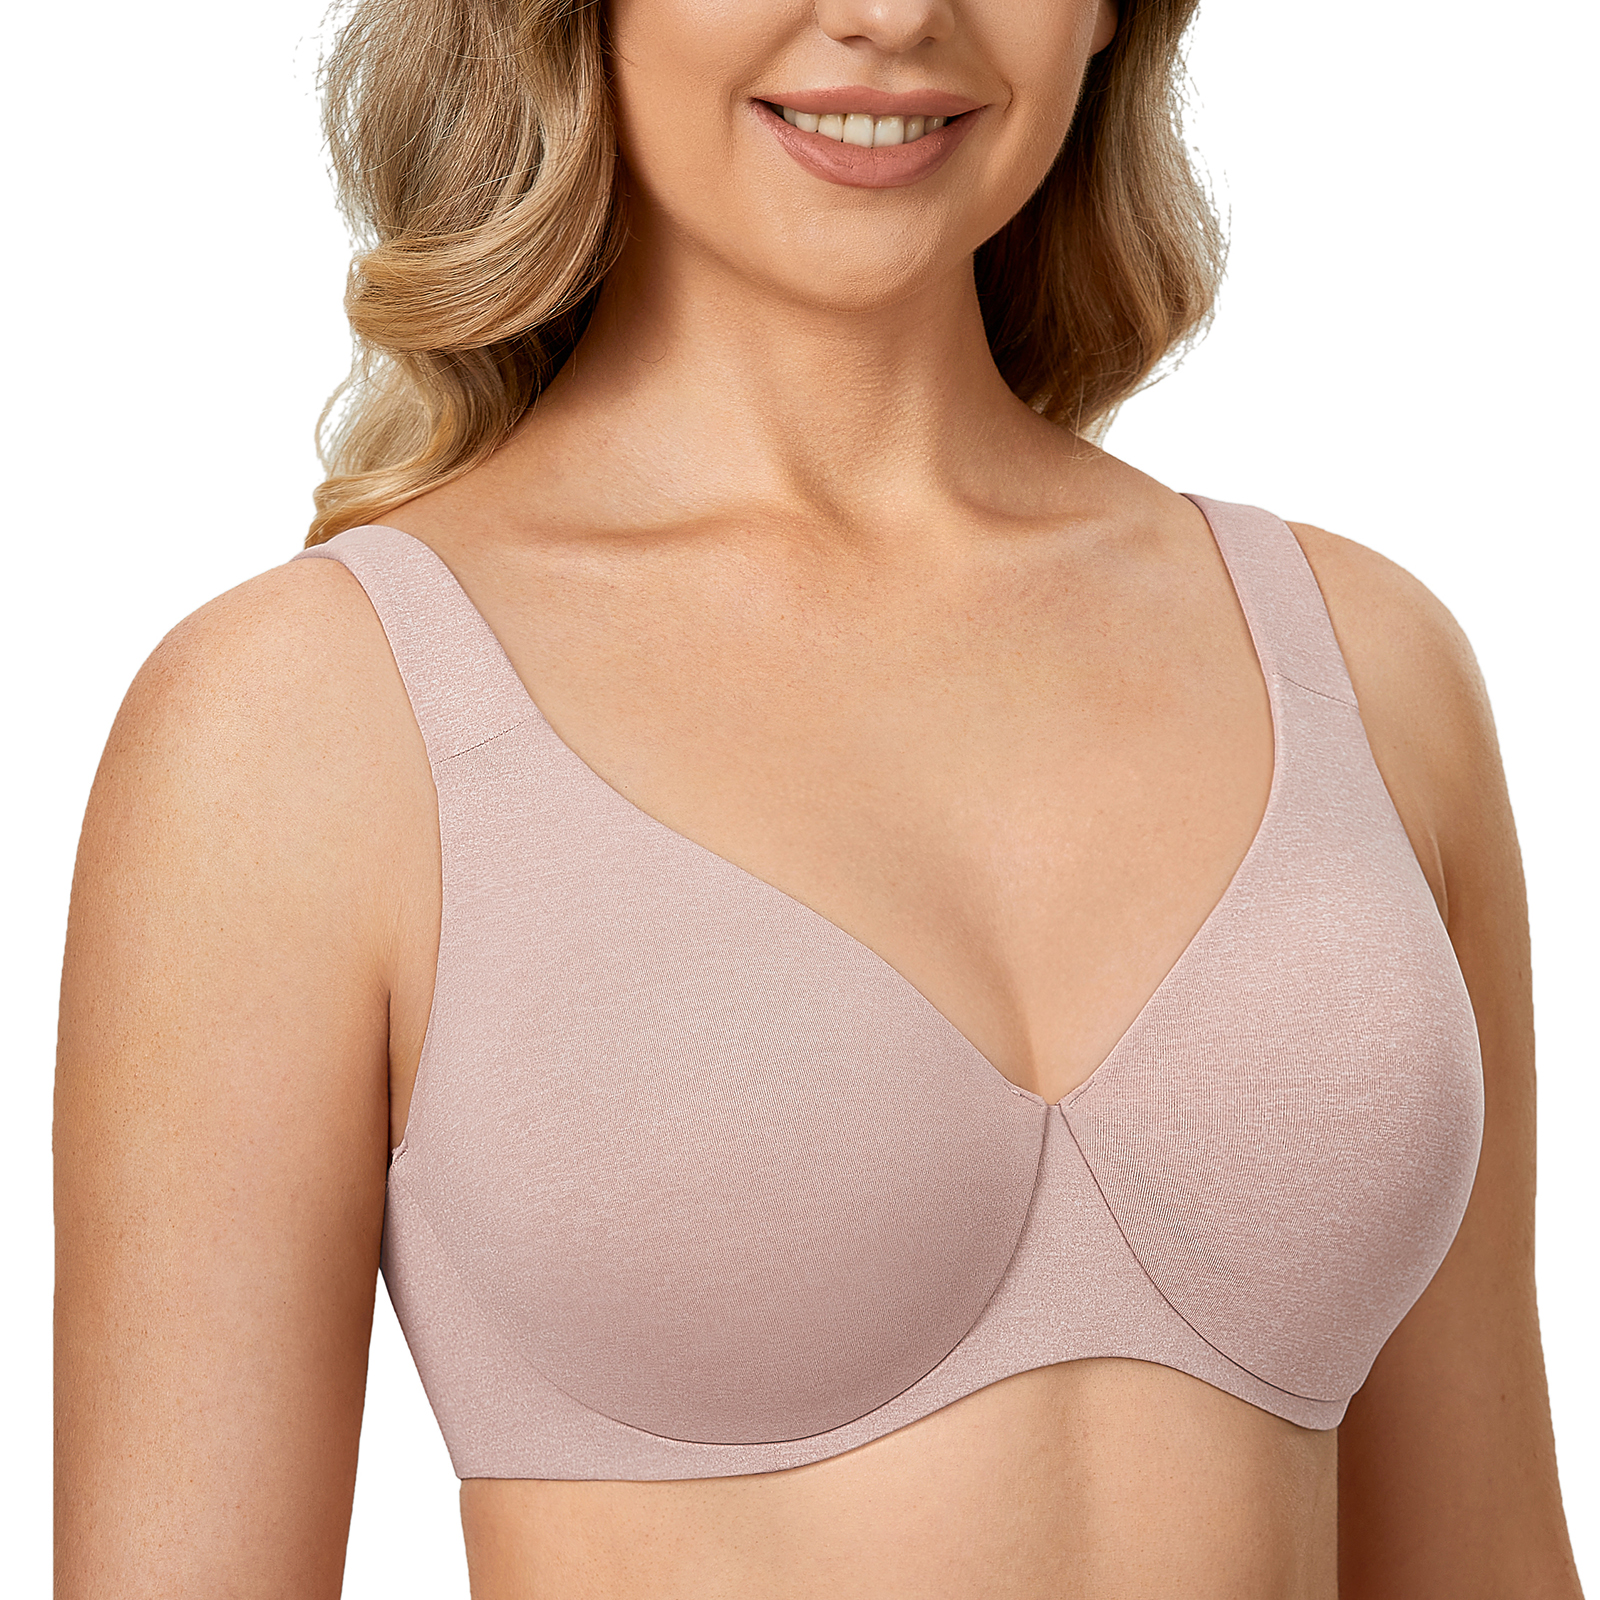 AISILIN Women's Seamless Bra Full Coverage Plus Size Unlined Cup